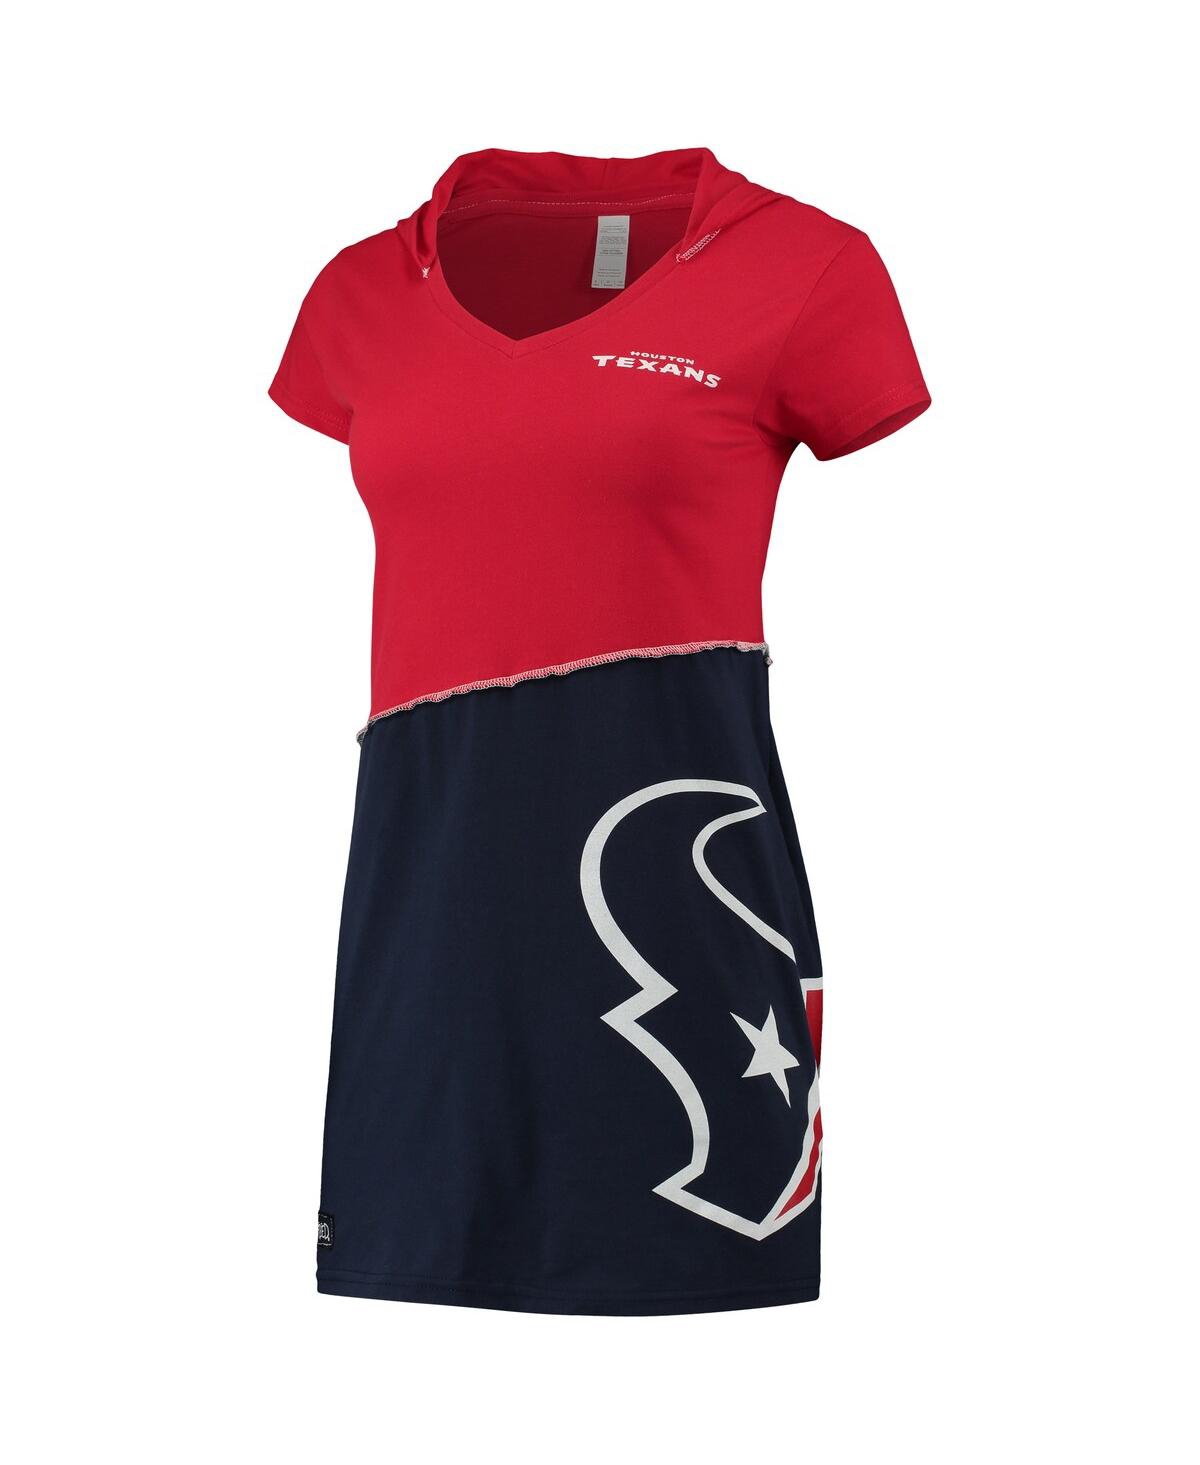 Women's Refried Apparel Red, Navy Houston Texans Hooded Mini Dress - Red, Navy